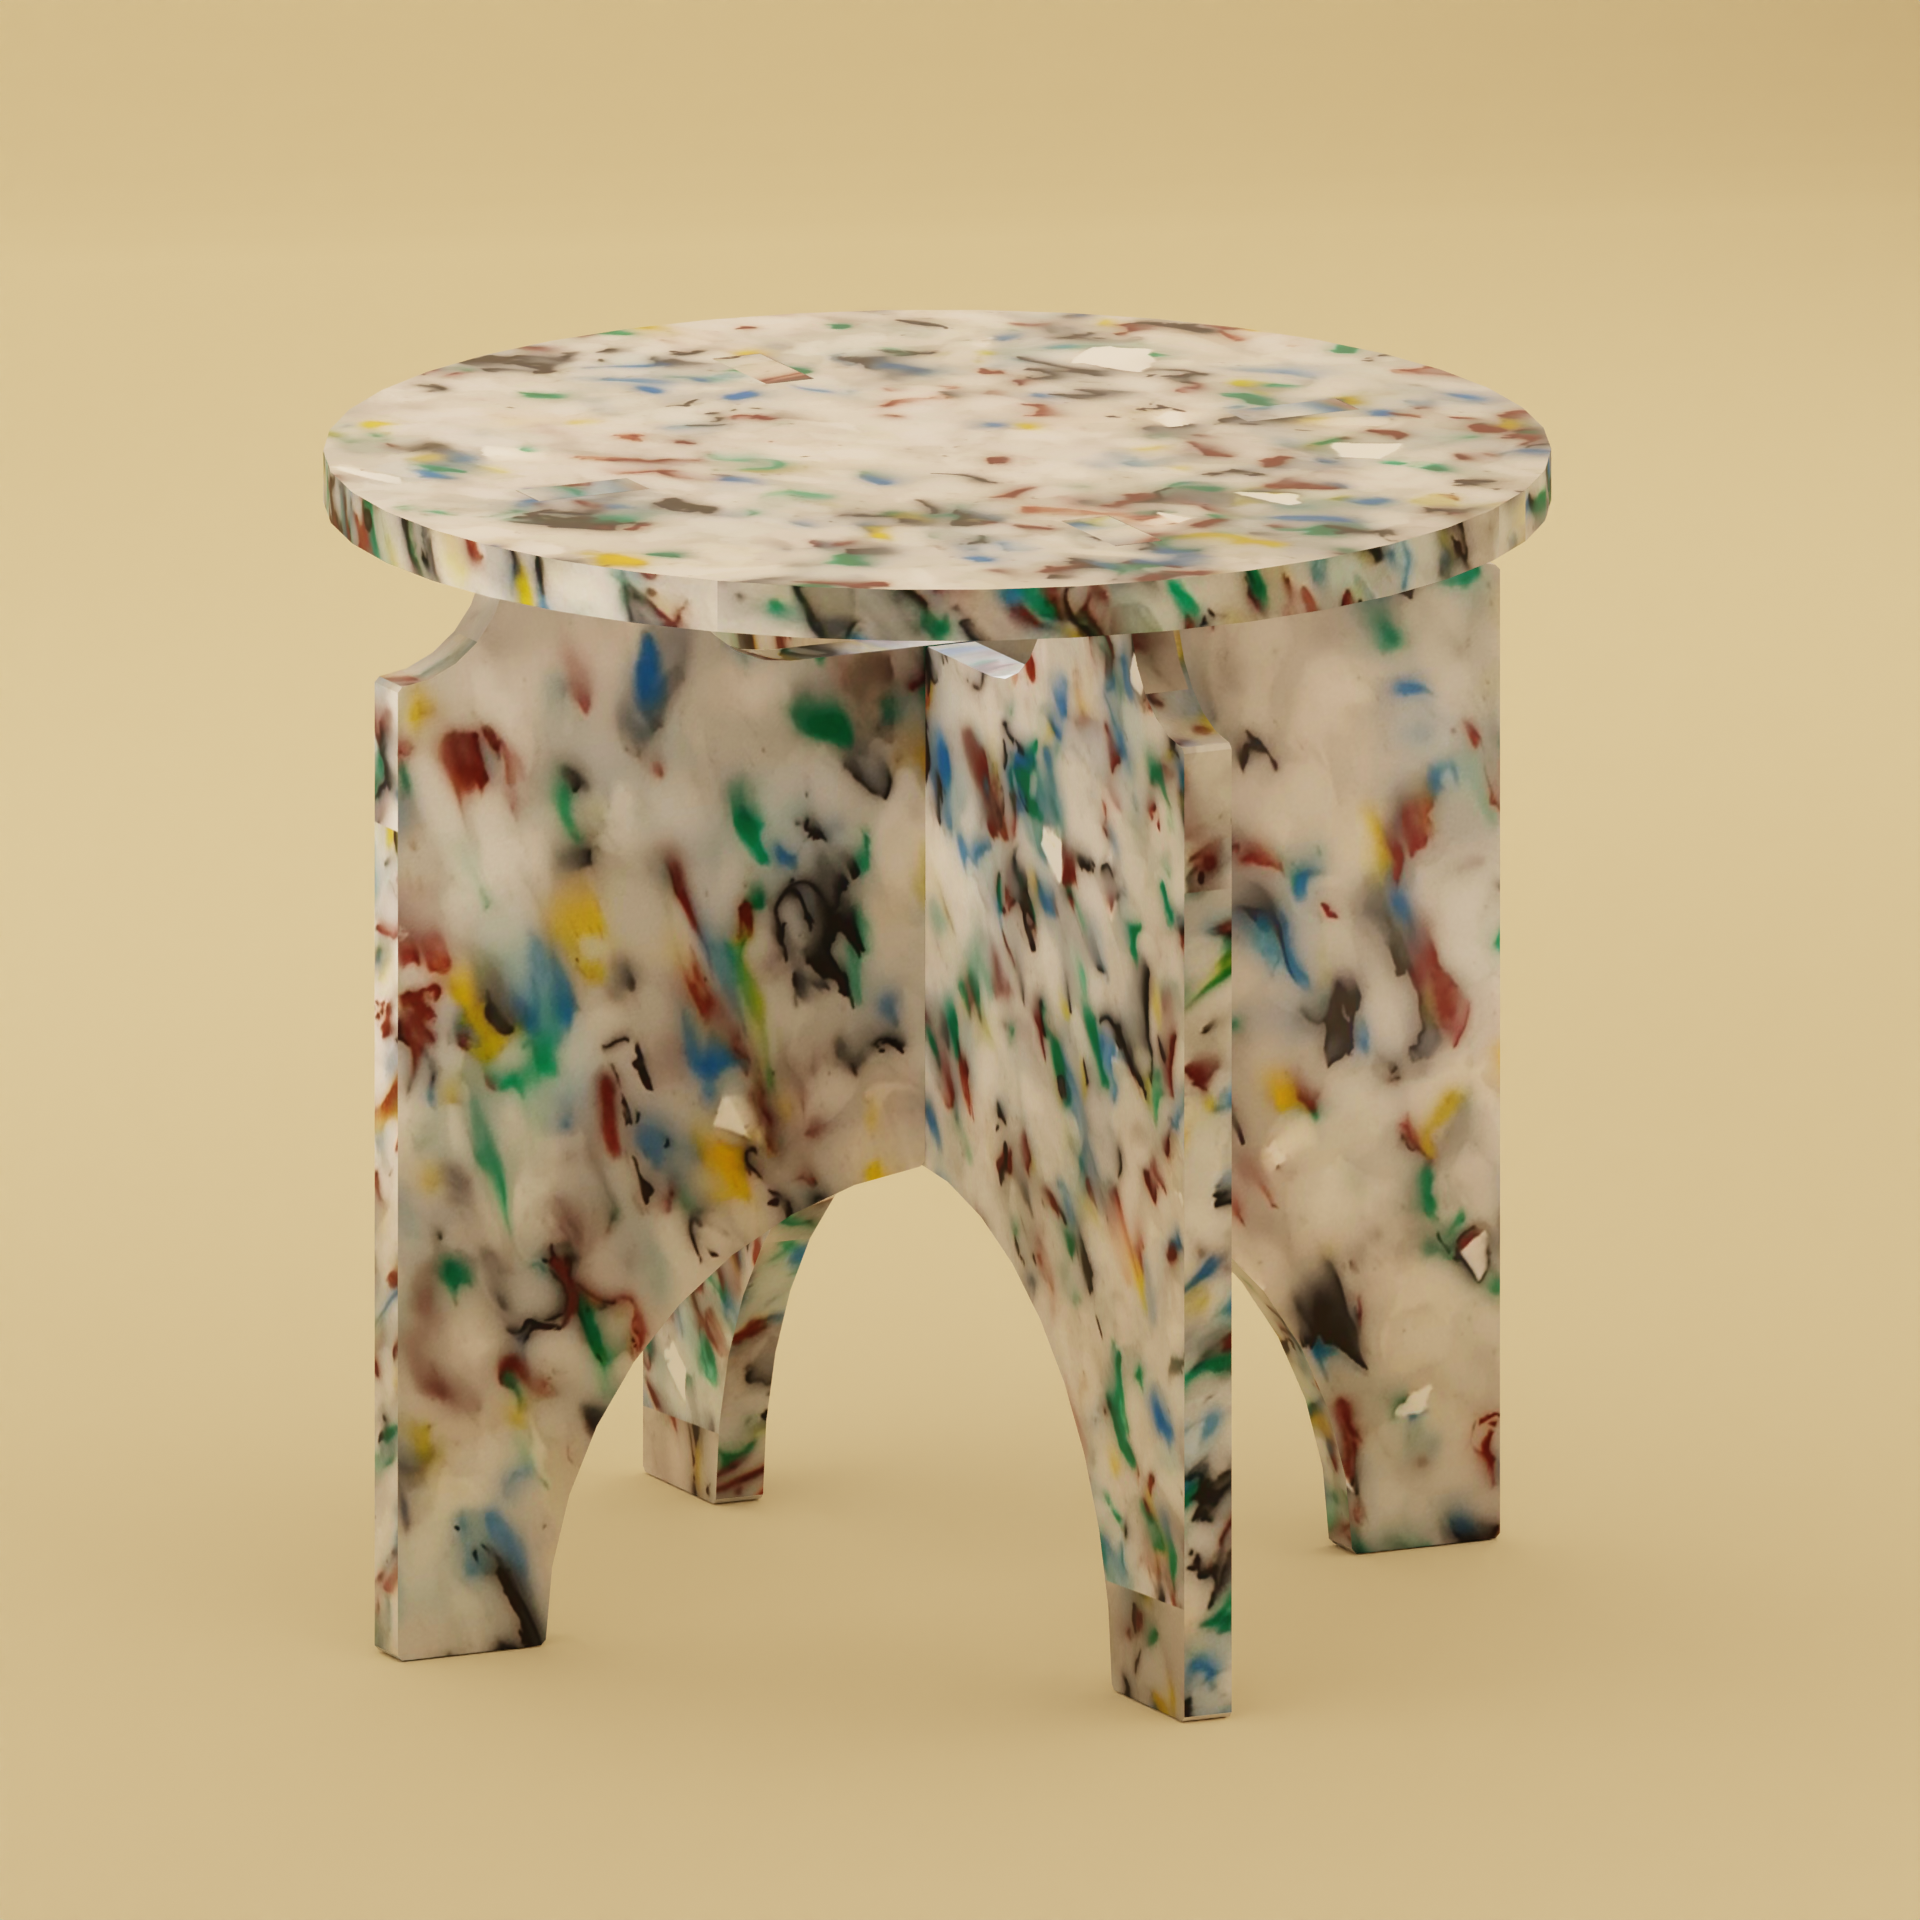 COLOURFUL STOOL BY THE MINIMONO PROJECT - BRAND FOR ECO FRIENDLY - PLAYFUL - MULTI FUNCTIONAL - SUSTAINABLE - HIGH QUALITY - DESIGN FURNITURE FROM RECYCLED PLASTIC FOR BOTH ADULT AND CHILDREN MADE IN BERLIN GERMANY